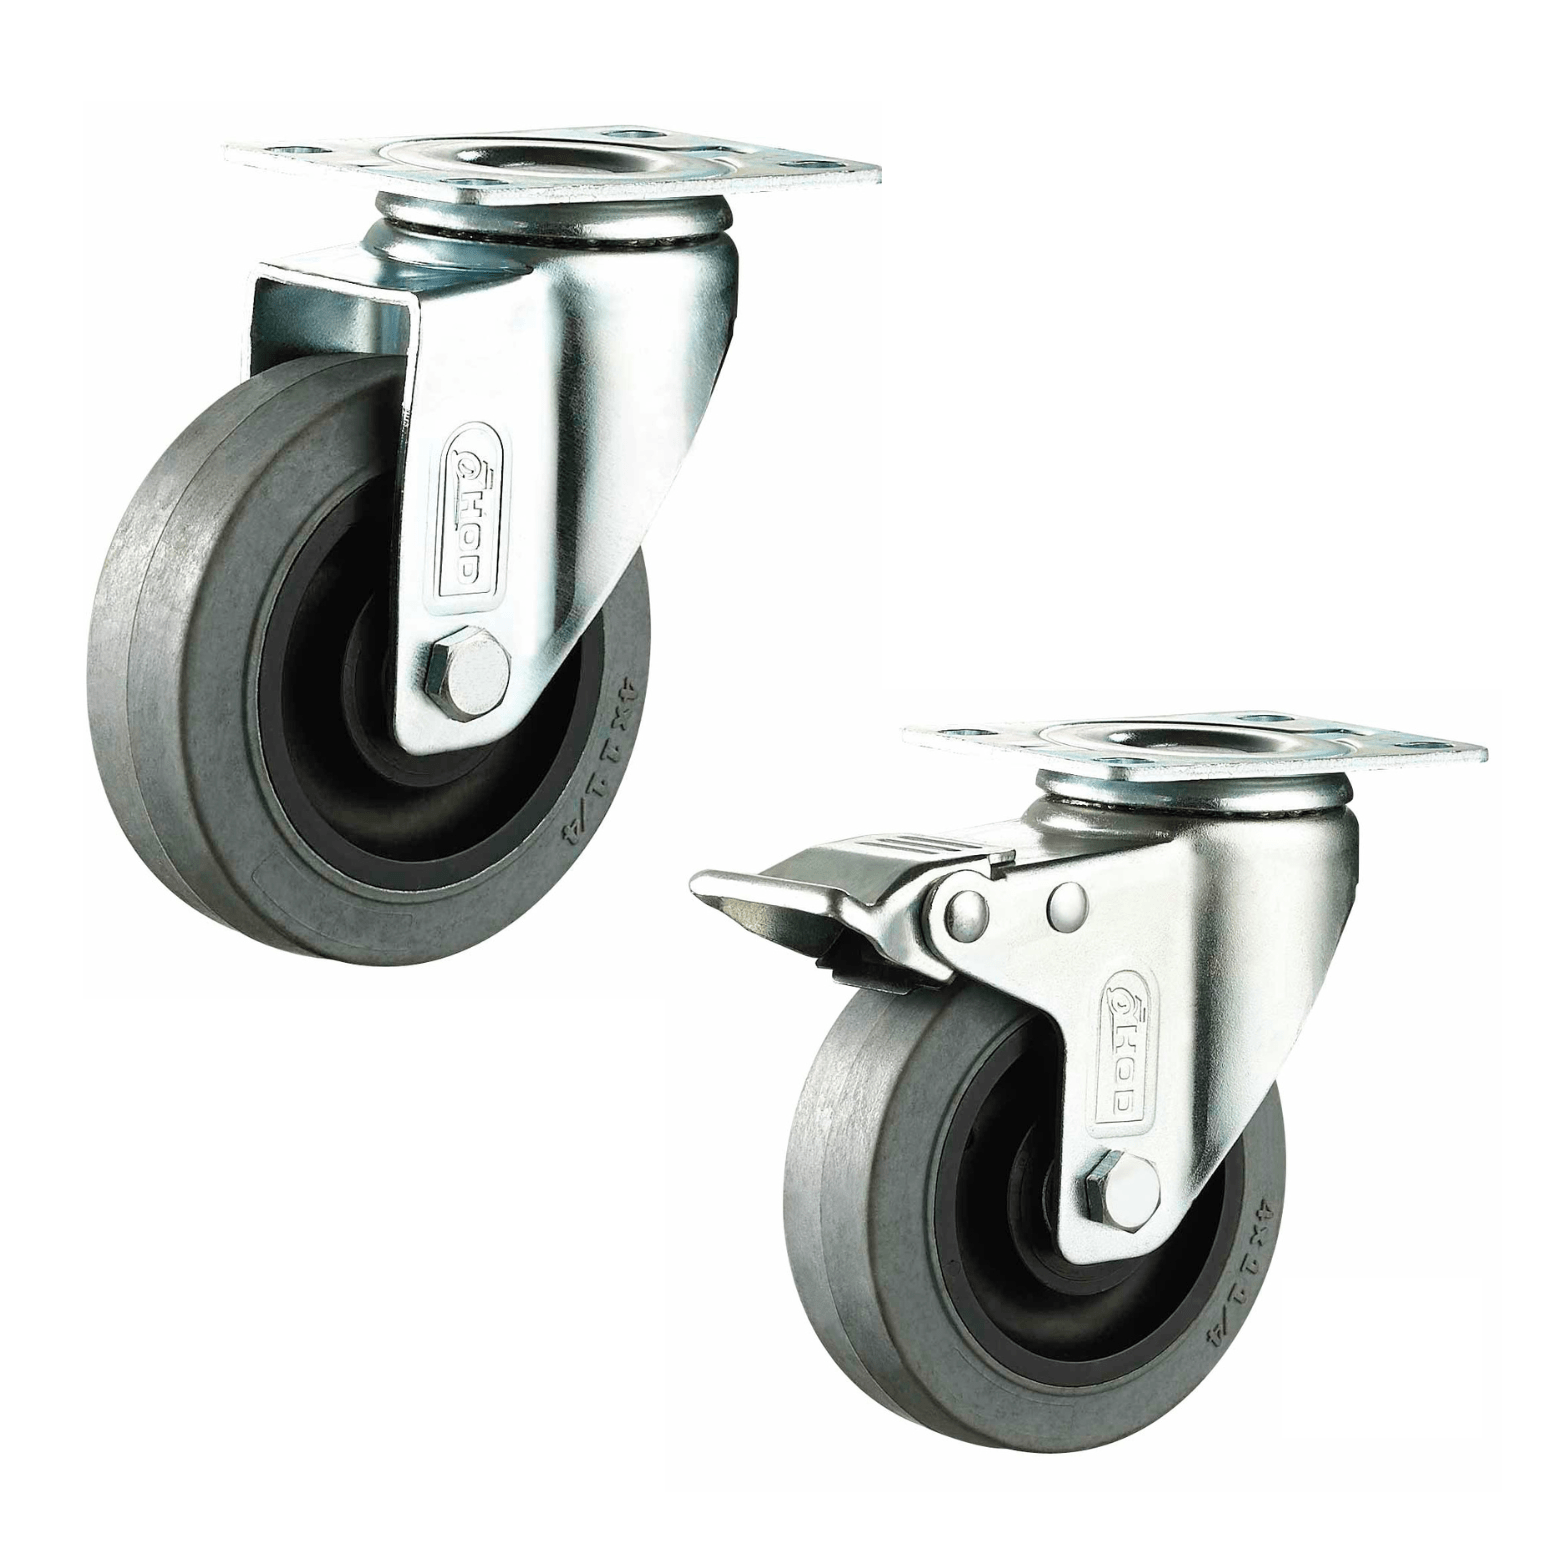 Medium Duty Antistatic Tpr Conductive Caster Wheels With Annular Bearing